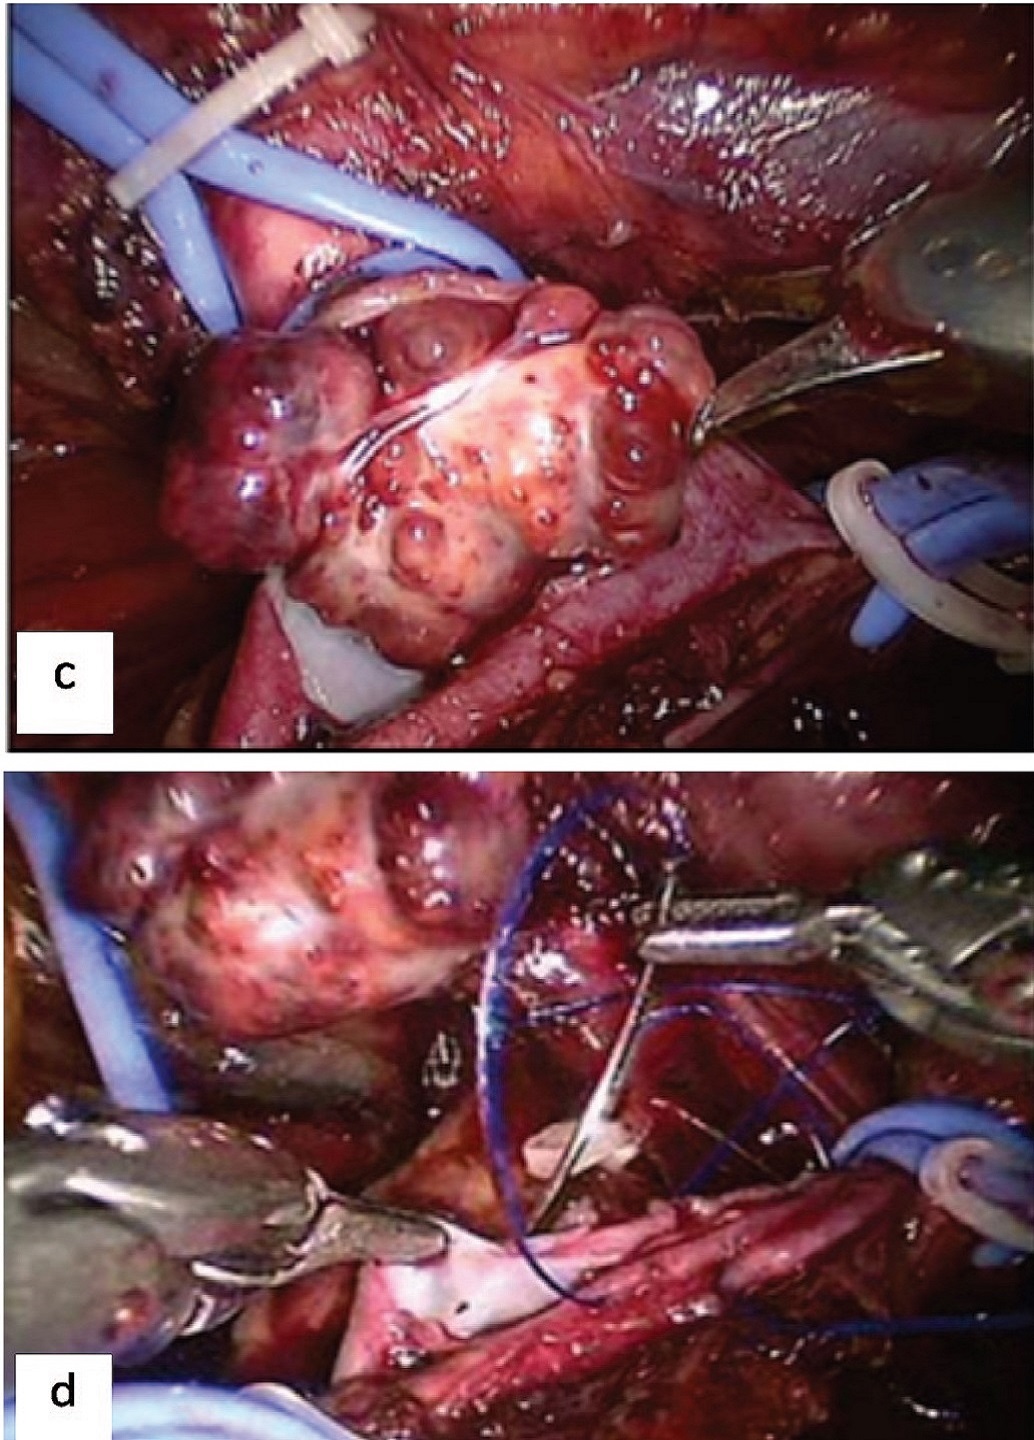 Stages of robot-assisted IVC thrombectomy: a – tourniquet placement, b – venotomy, c – IVC thrombectomy, d – suturing of the venotomy